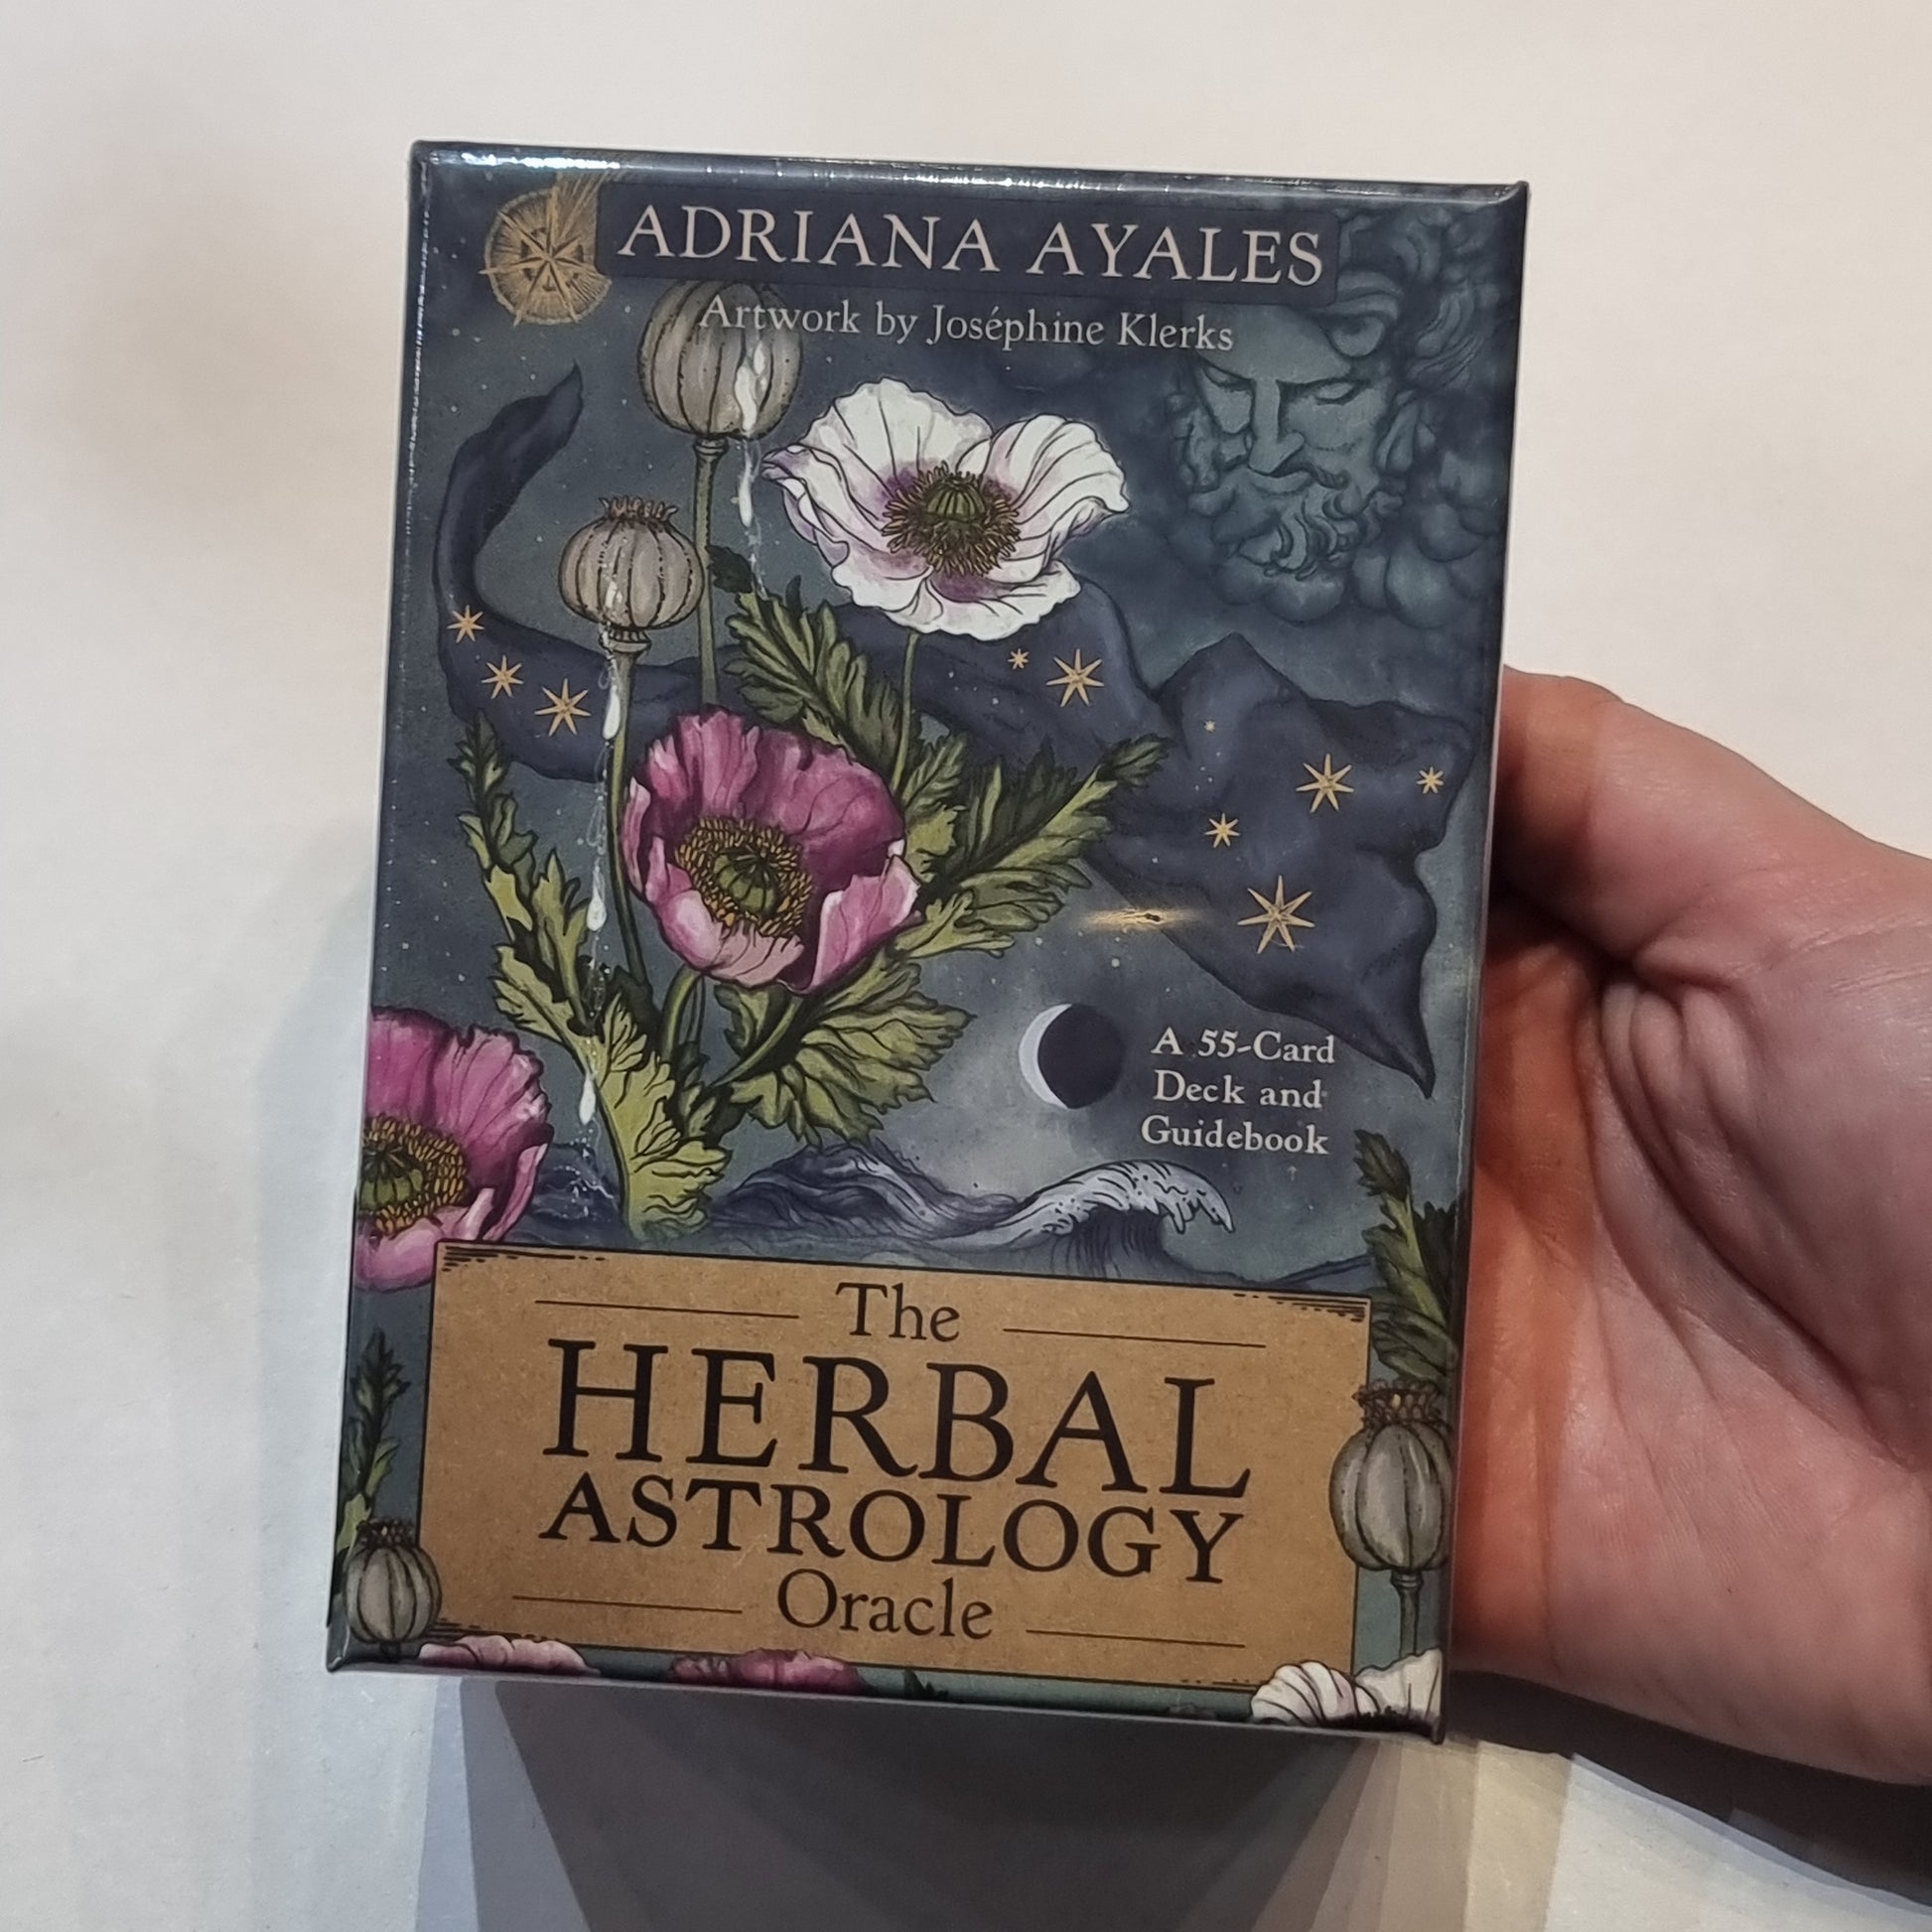 The herbal astrology oracle - Rivendell Shop